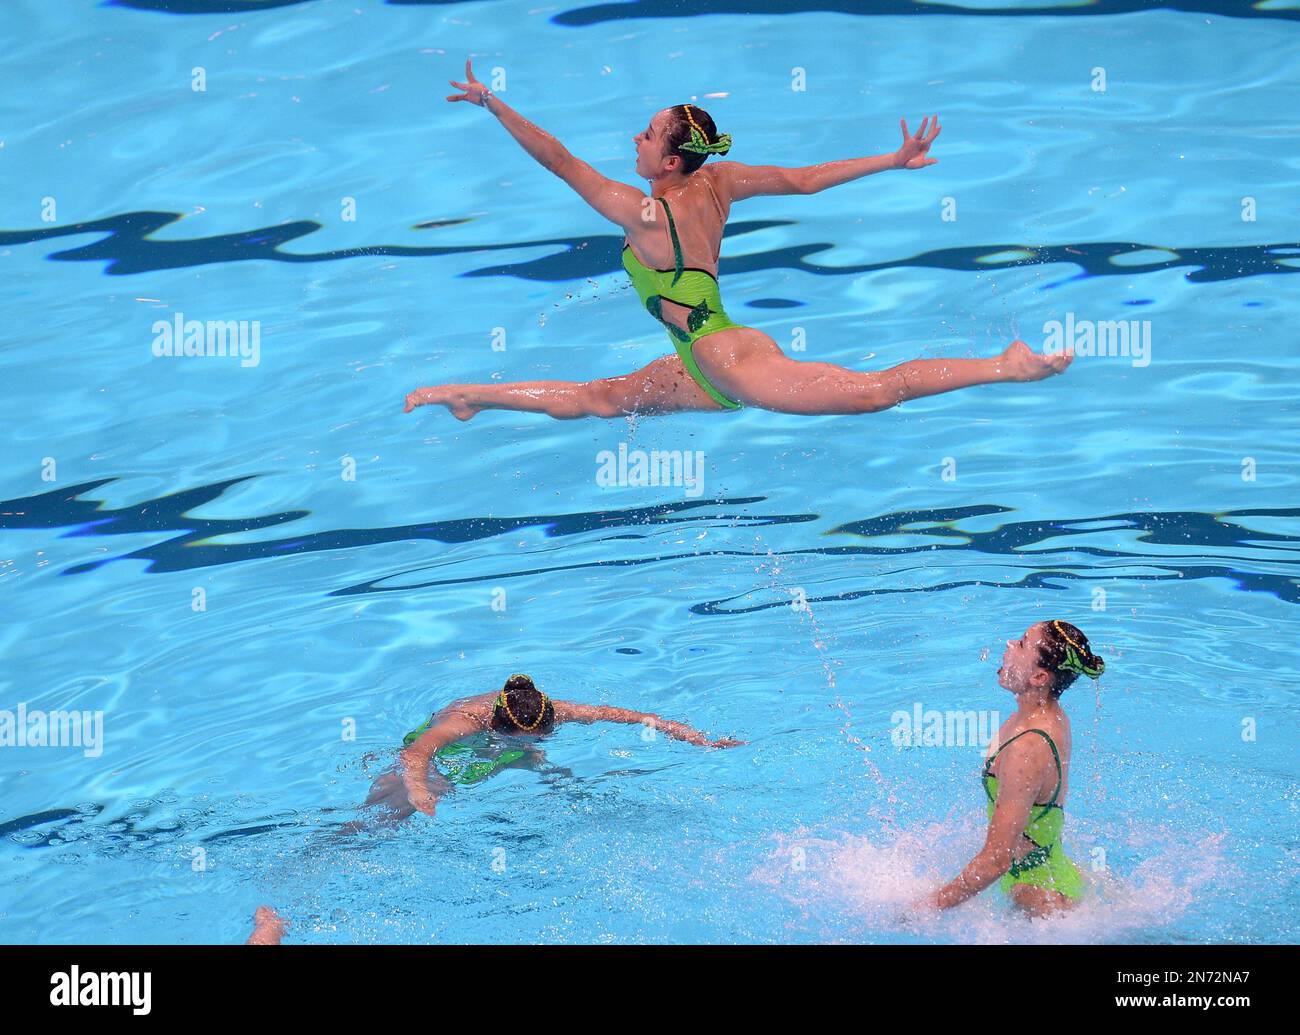 North Korea perform their routine during the synchronized swimming team free combination final at the FINA Swimming World Championships in Barcelona, Spain, Saturday, July 27, 2013